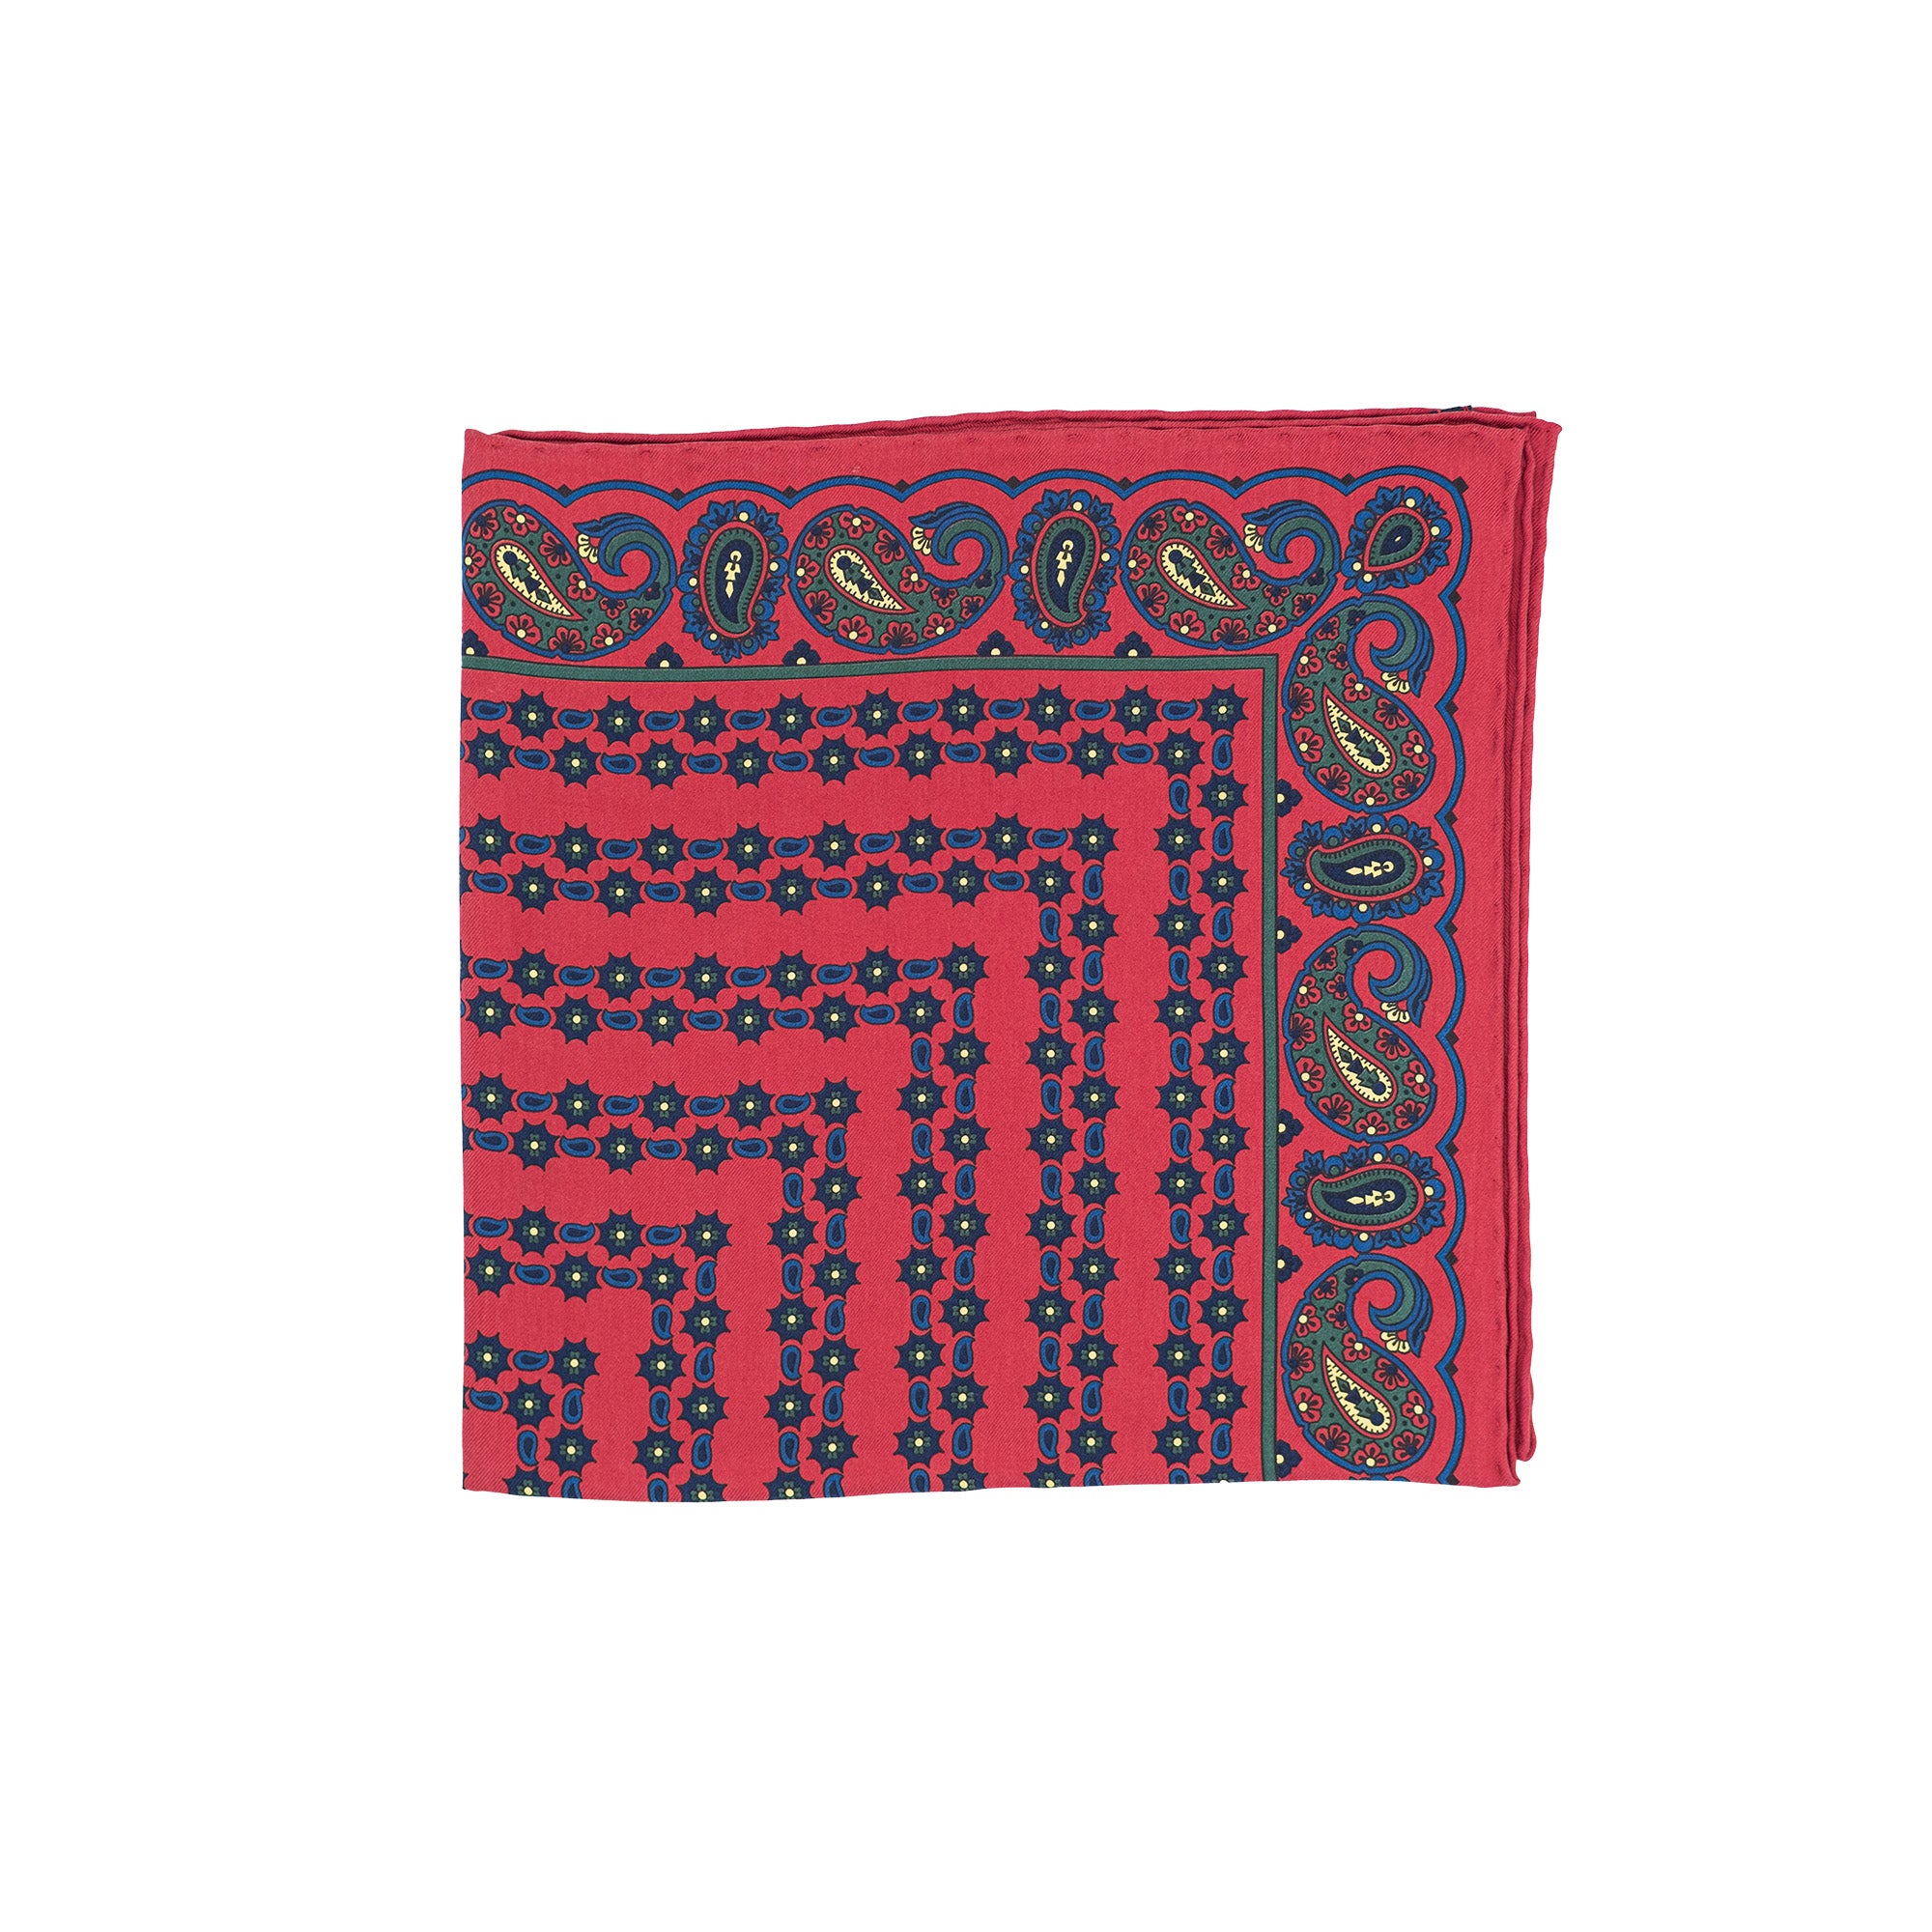 Pocket Square - Red Paisley